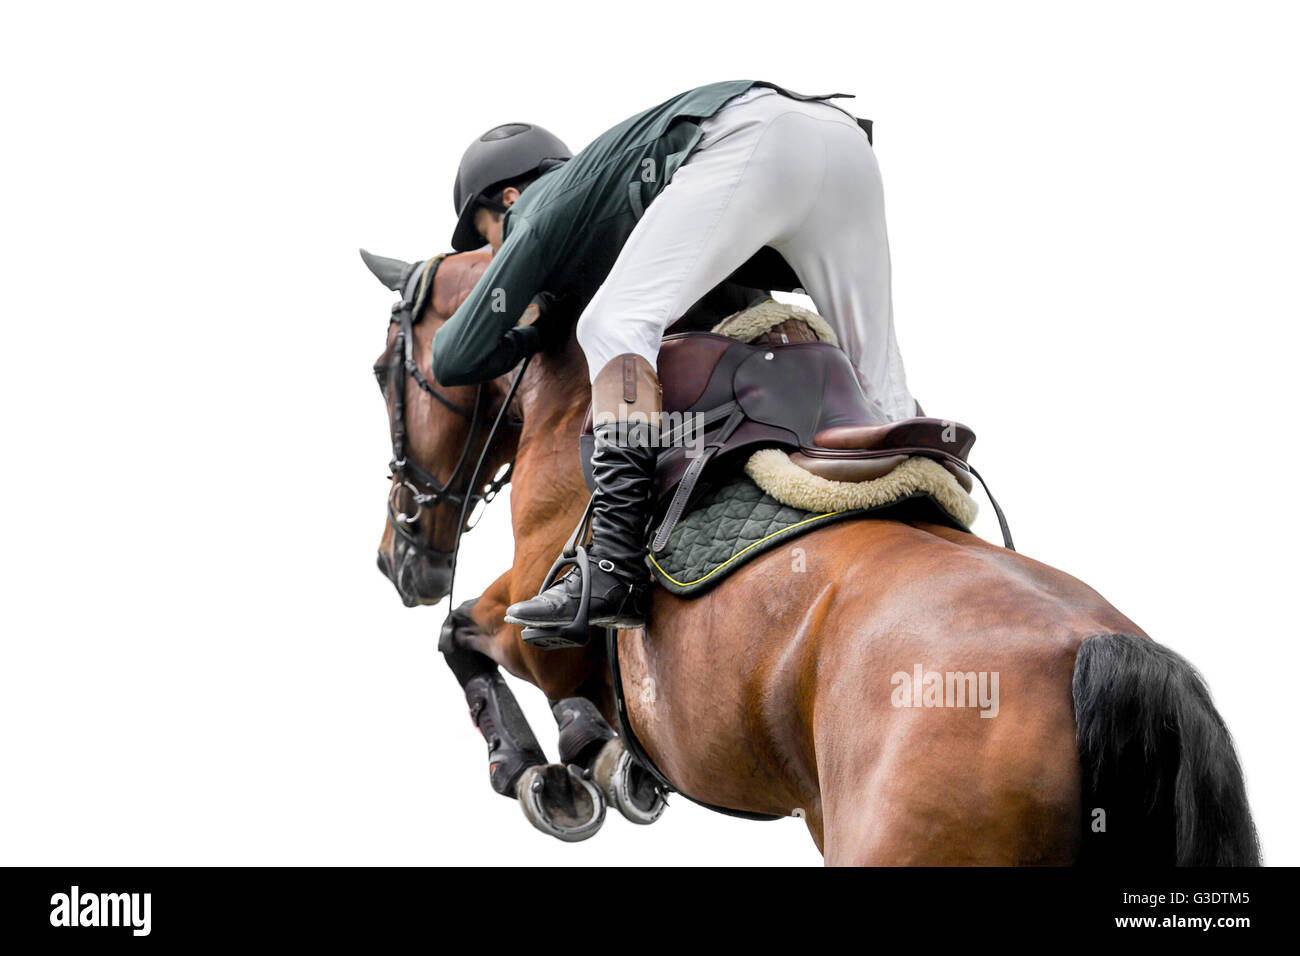 Horse Jumping, Equestrian Sports, Isolated on White Background Stock Photo